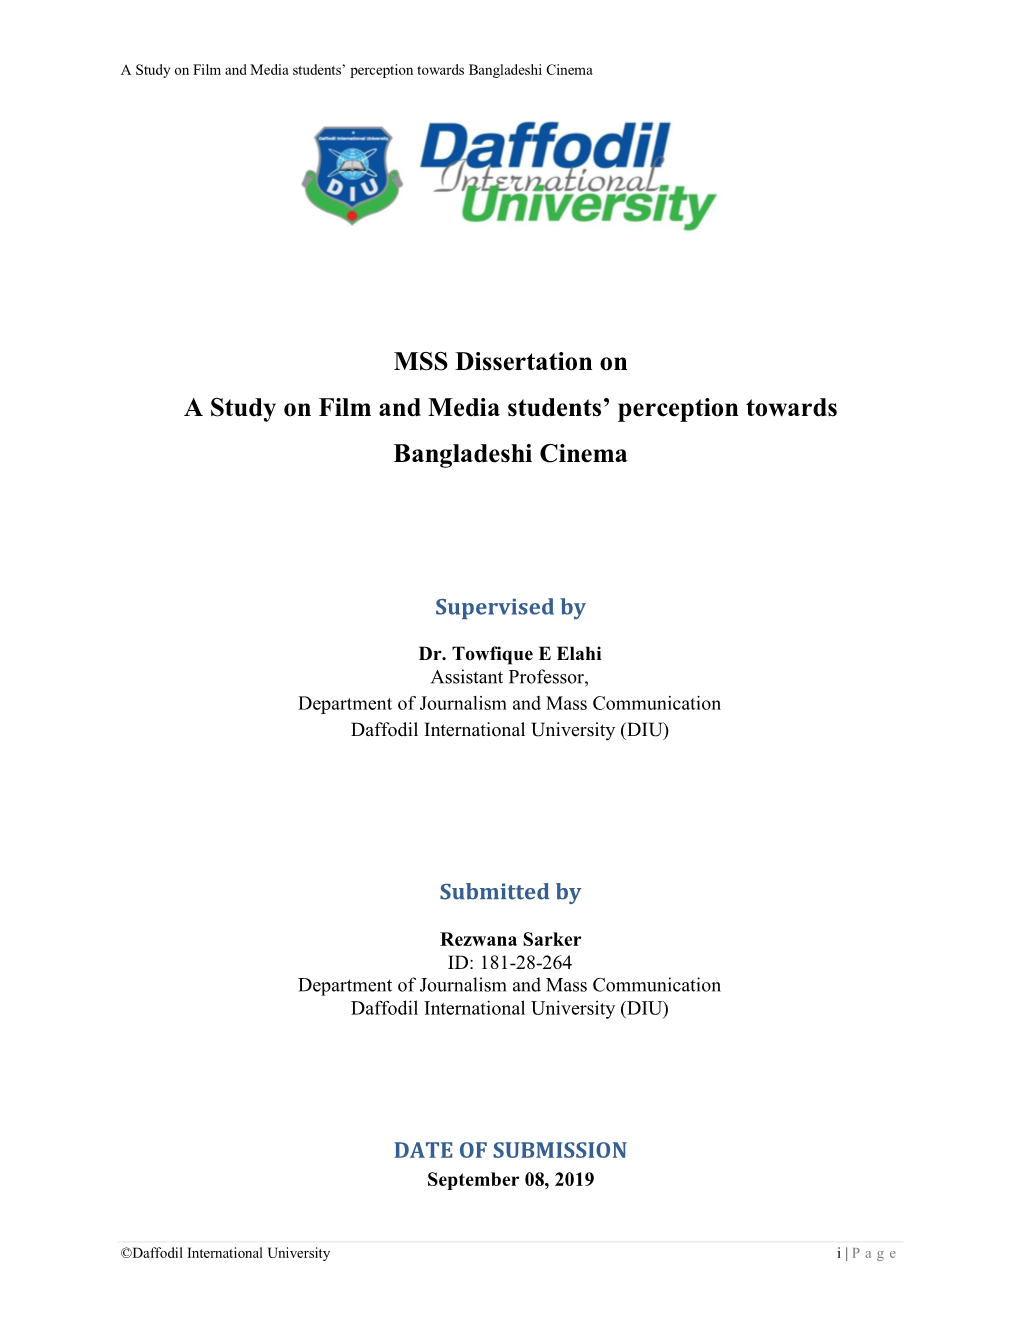 MSS Dissertation on a Study on Film and Media Students' Perception